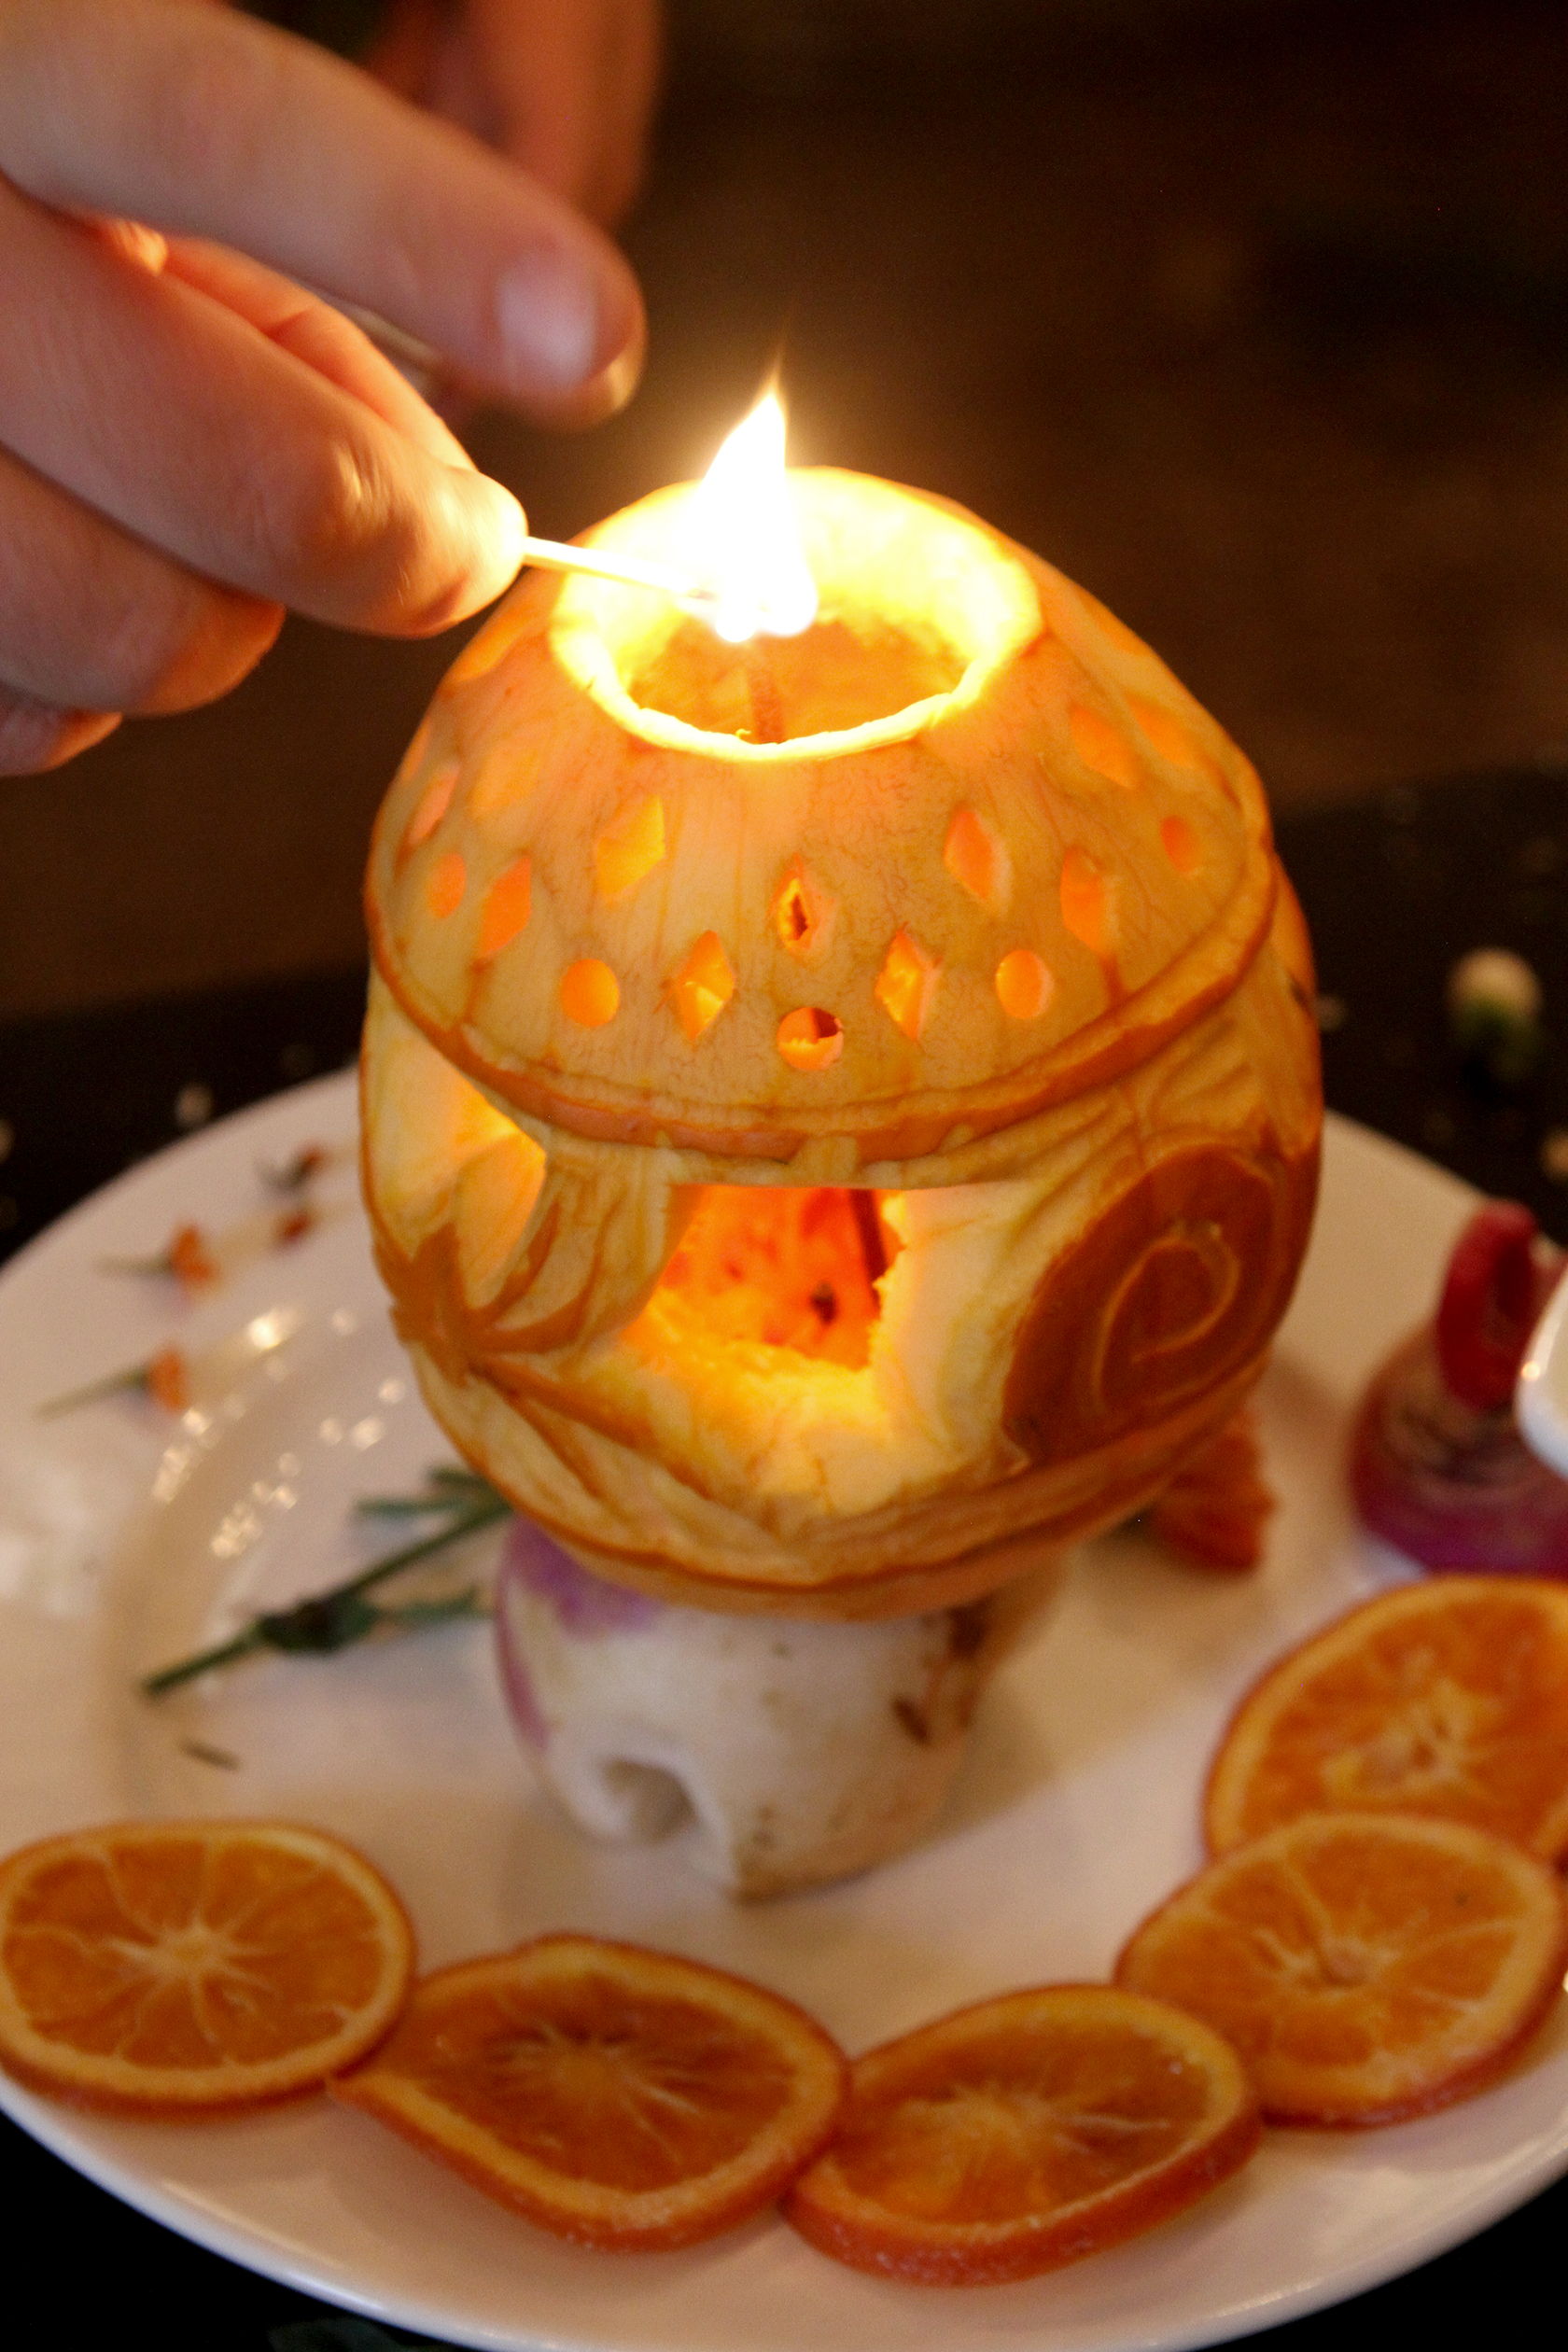 Image of a hand lighting an incense in a lantern made out of pumpkin on a white plate